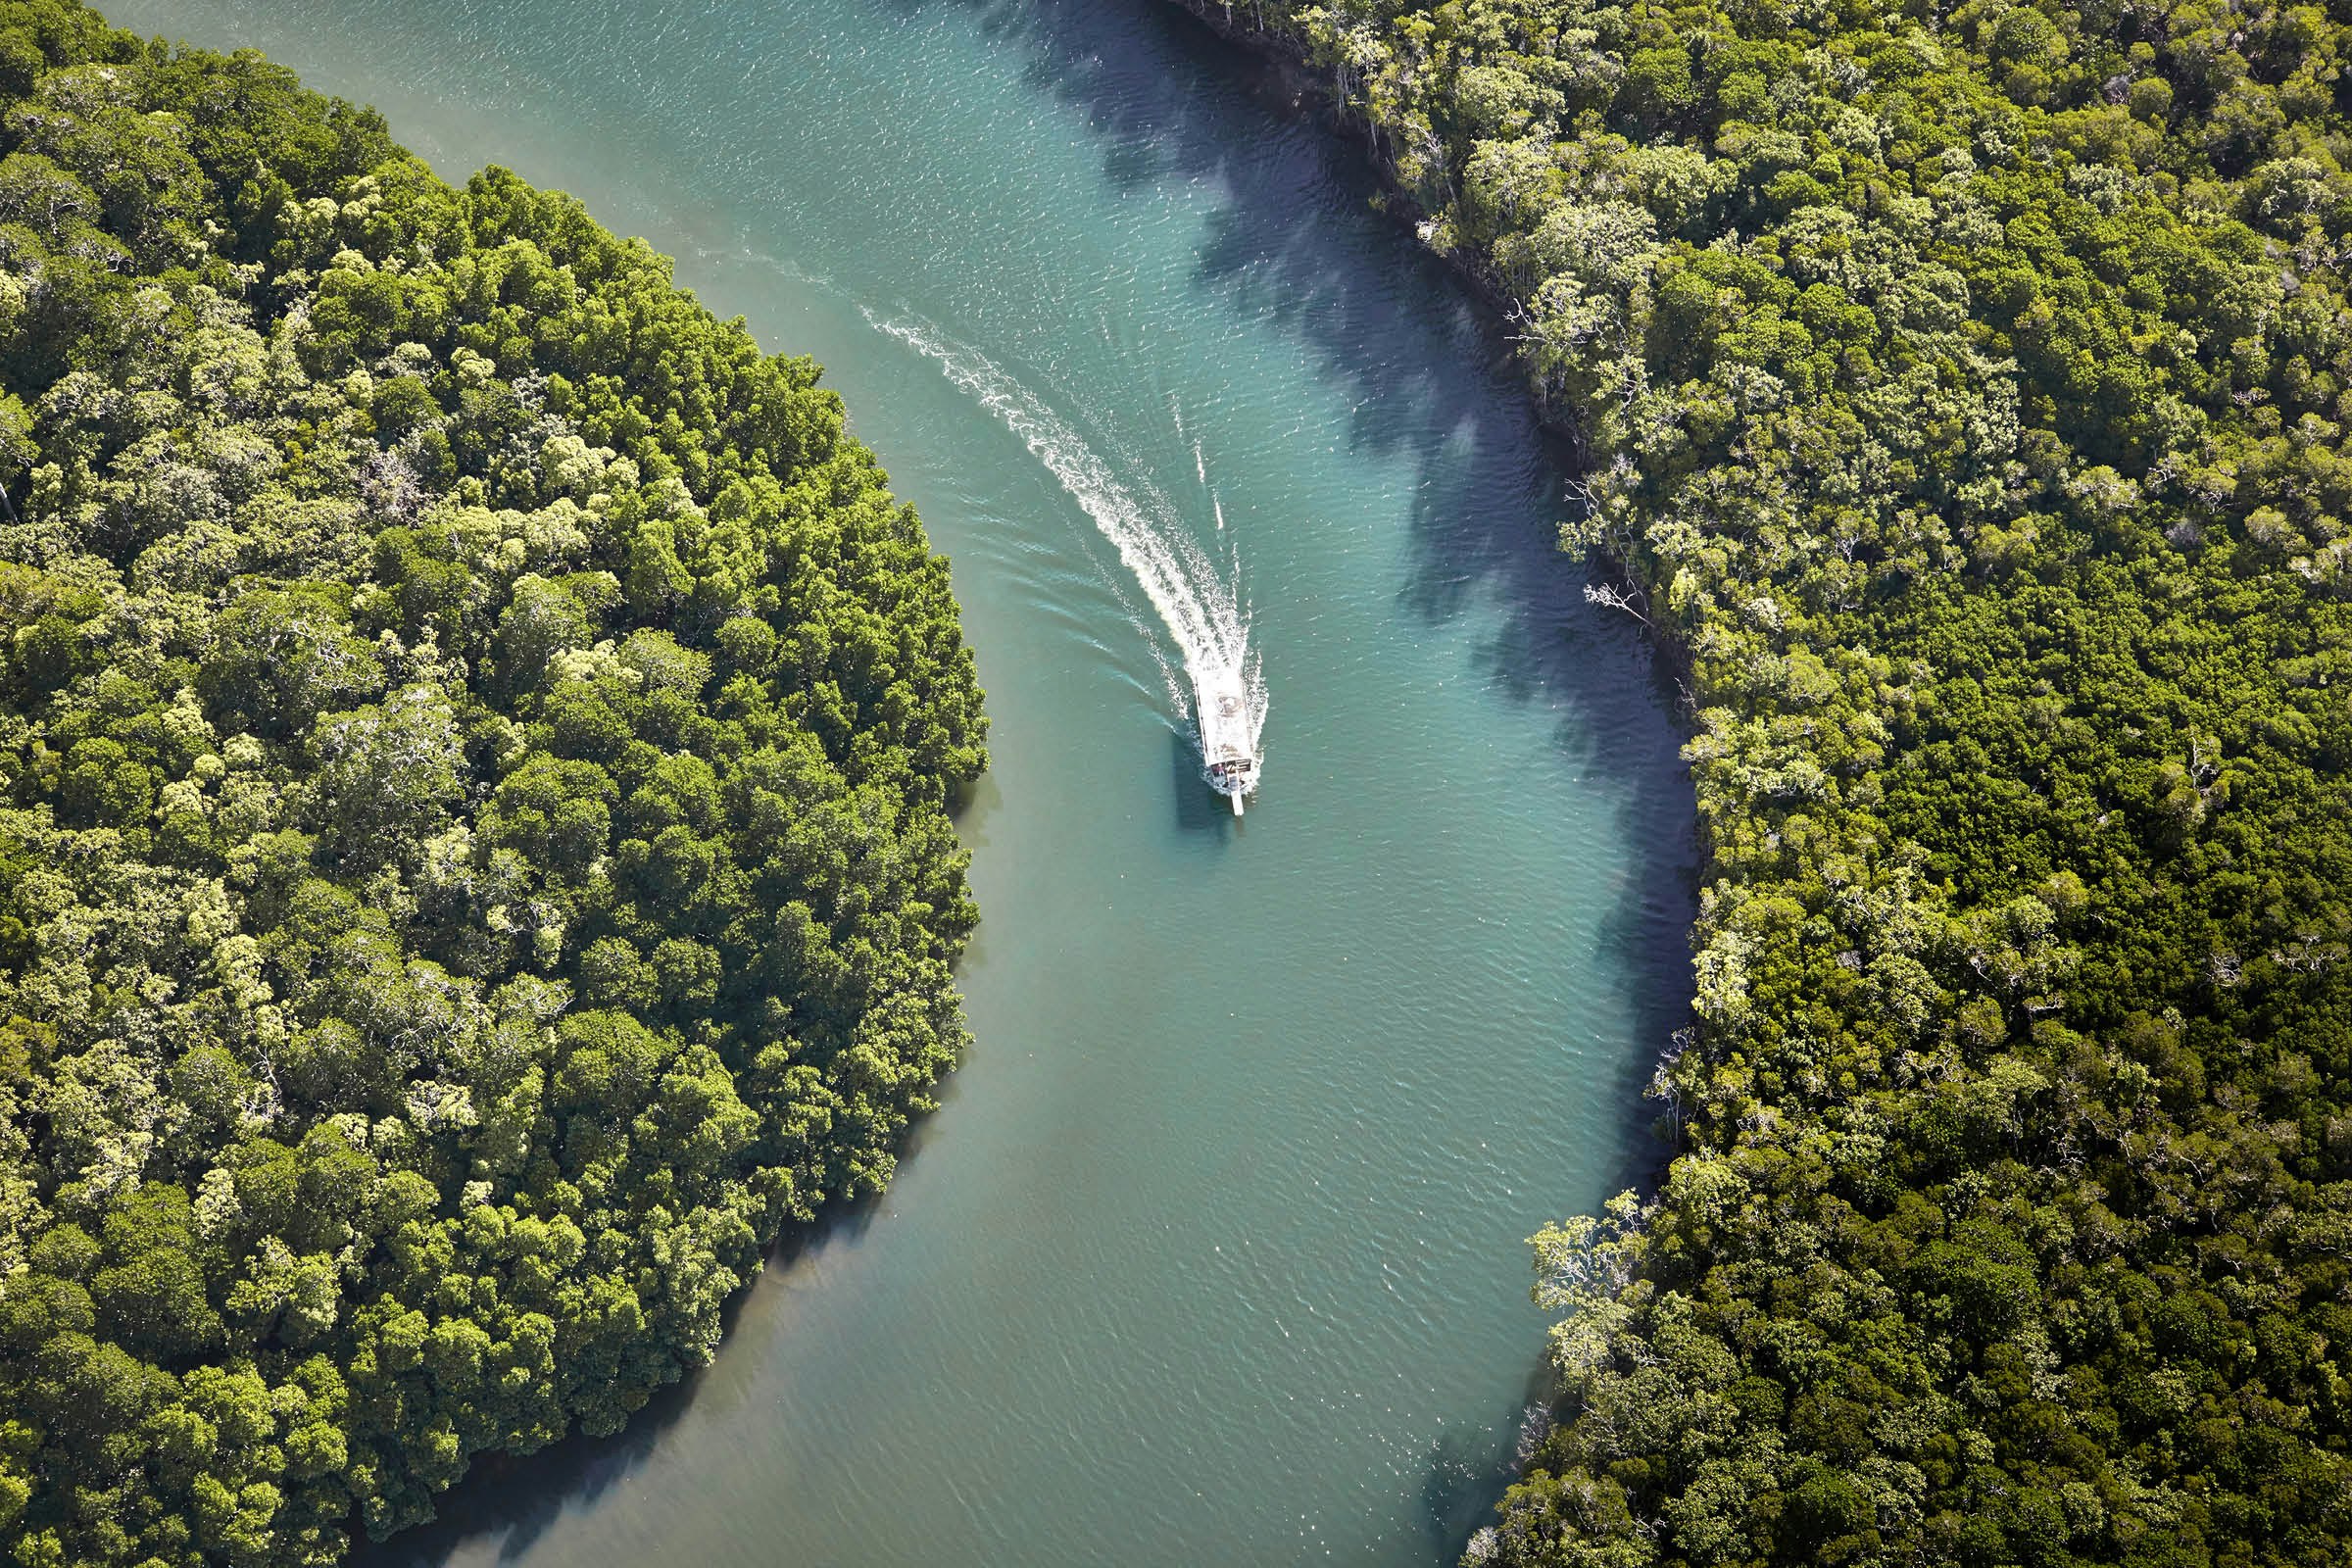 A boat leaves a wake in the Daintree River, seen from above